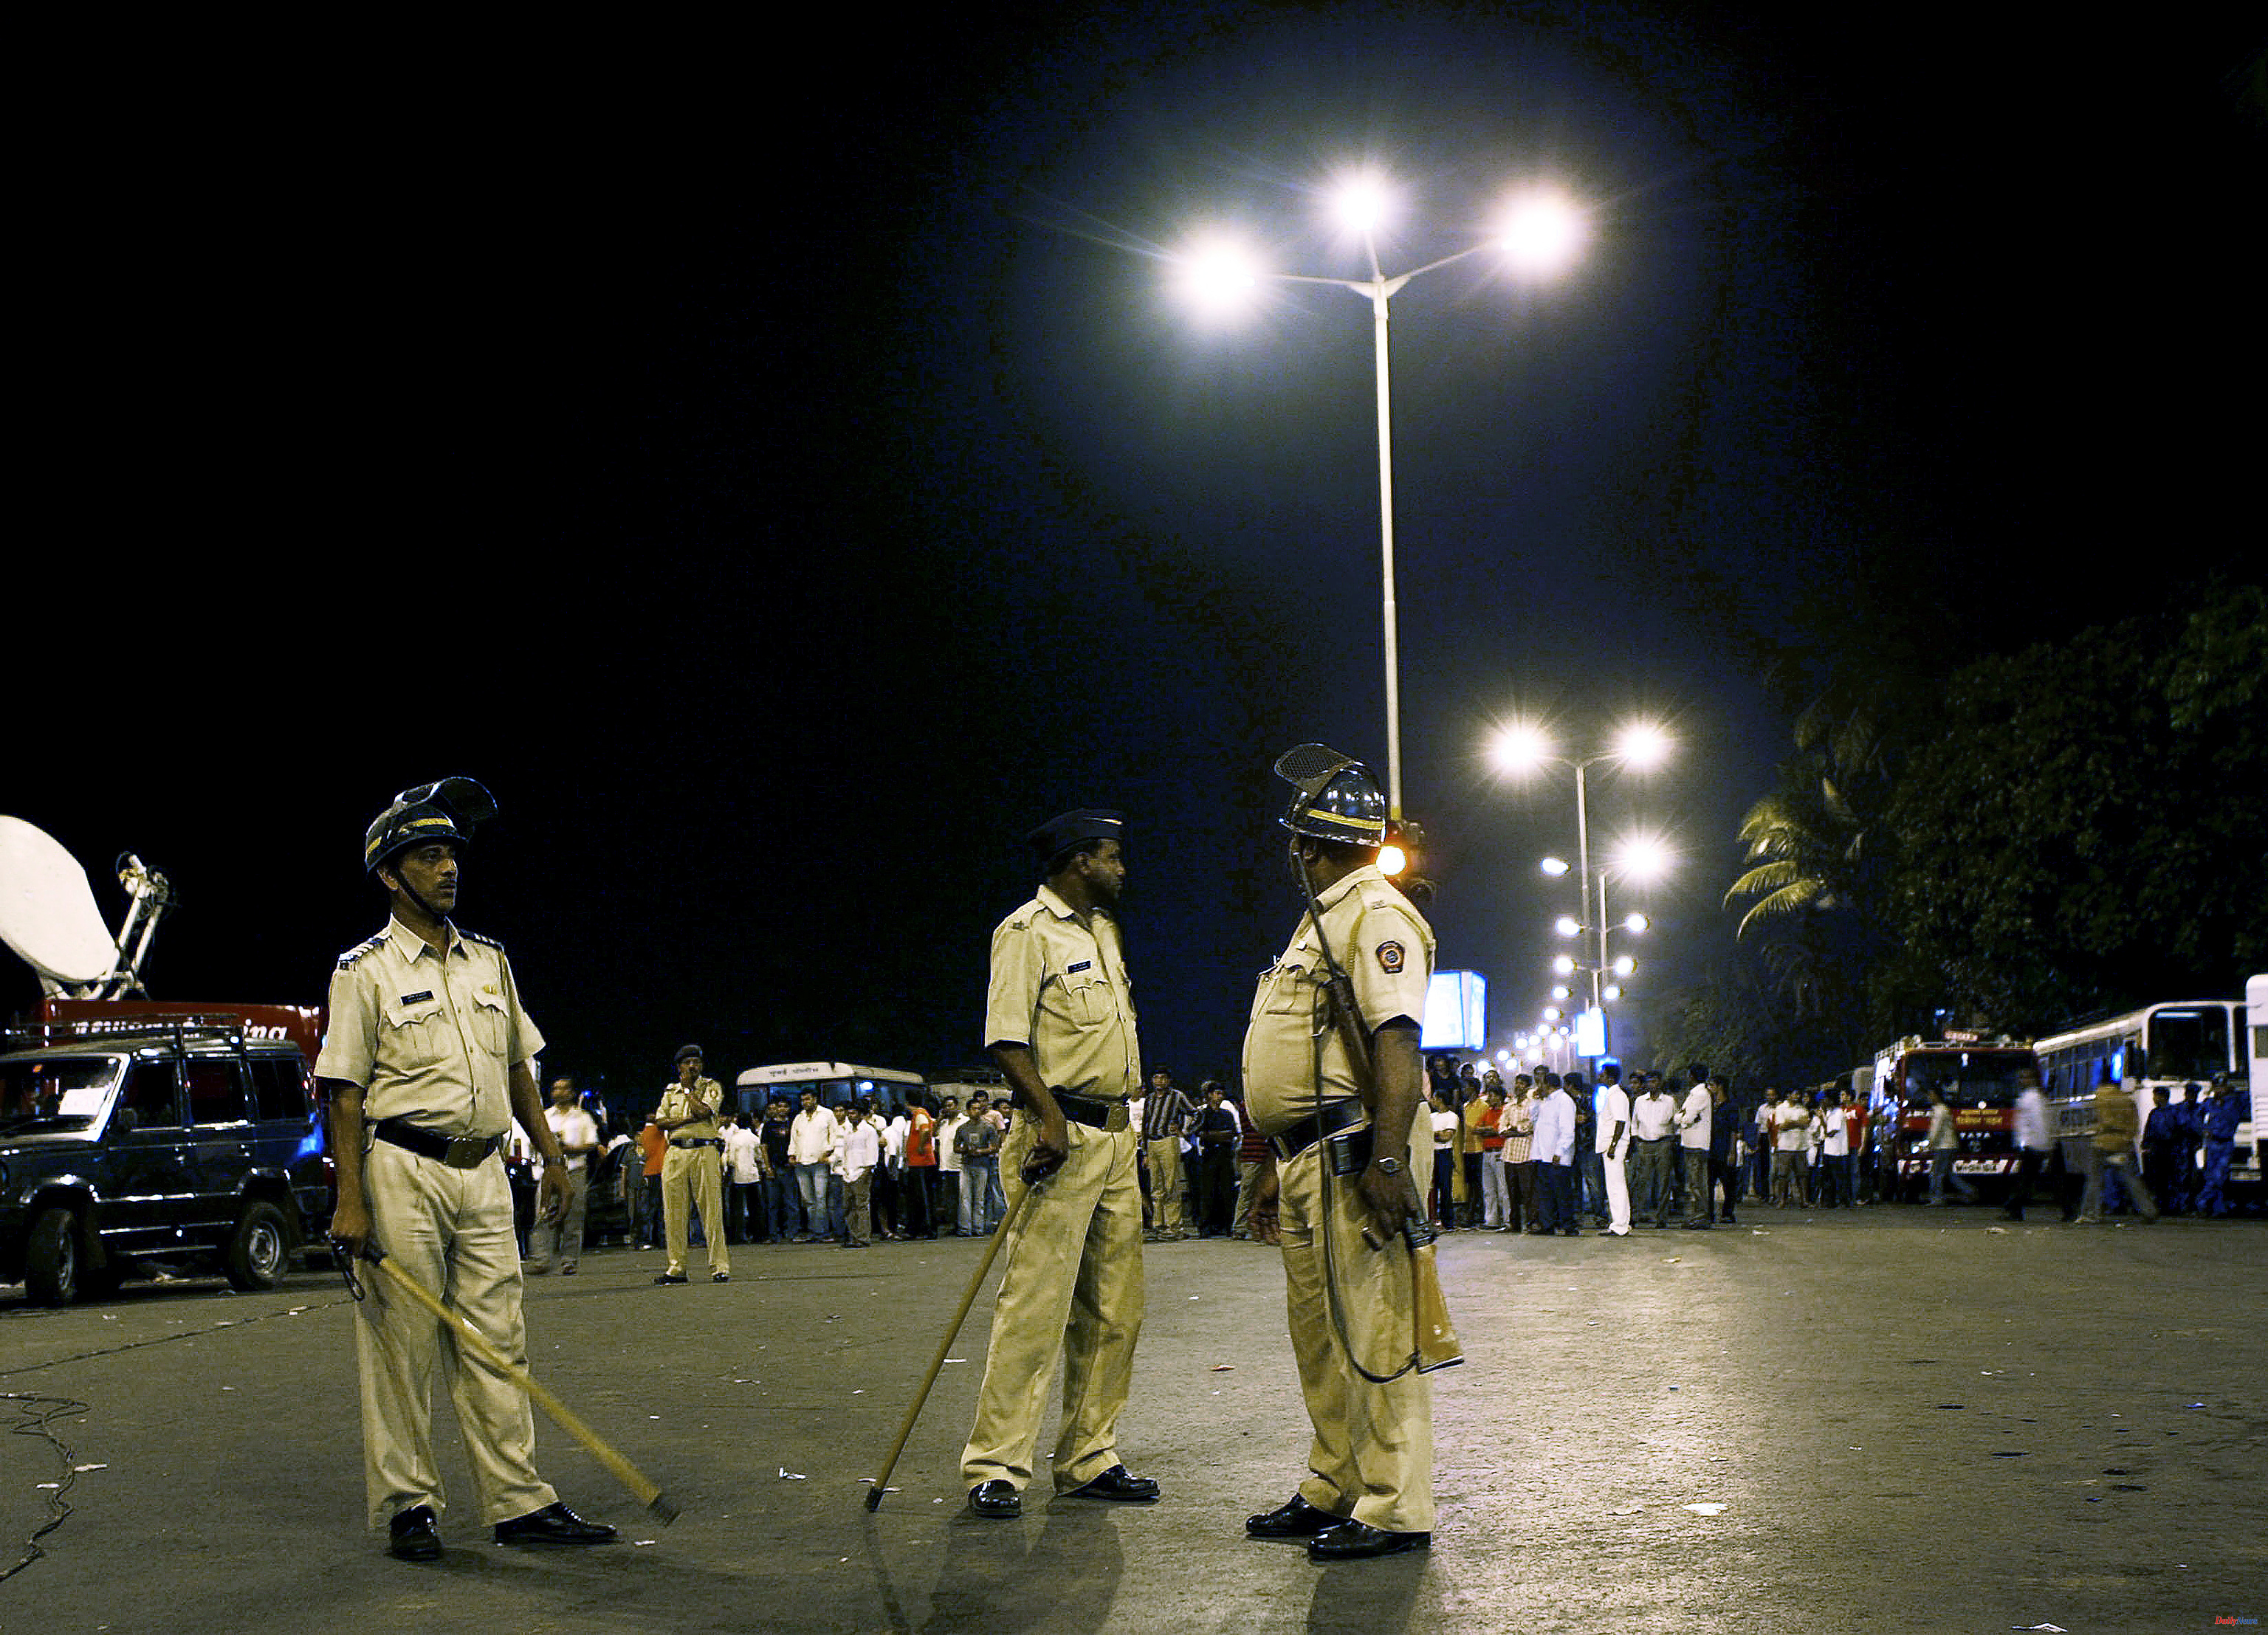 India A man sends a bomb inside a gift to his ex's wedding and kills her new husband